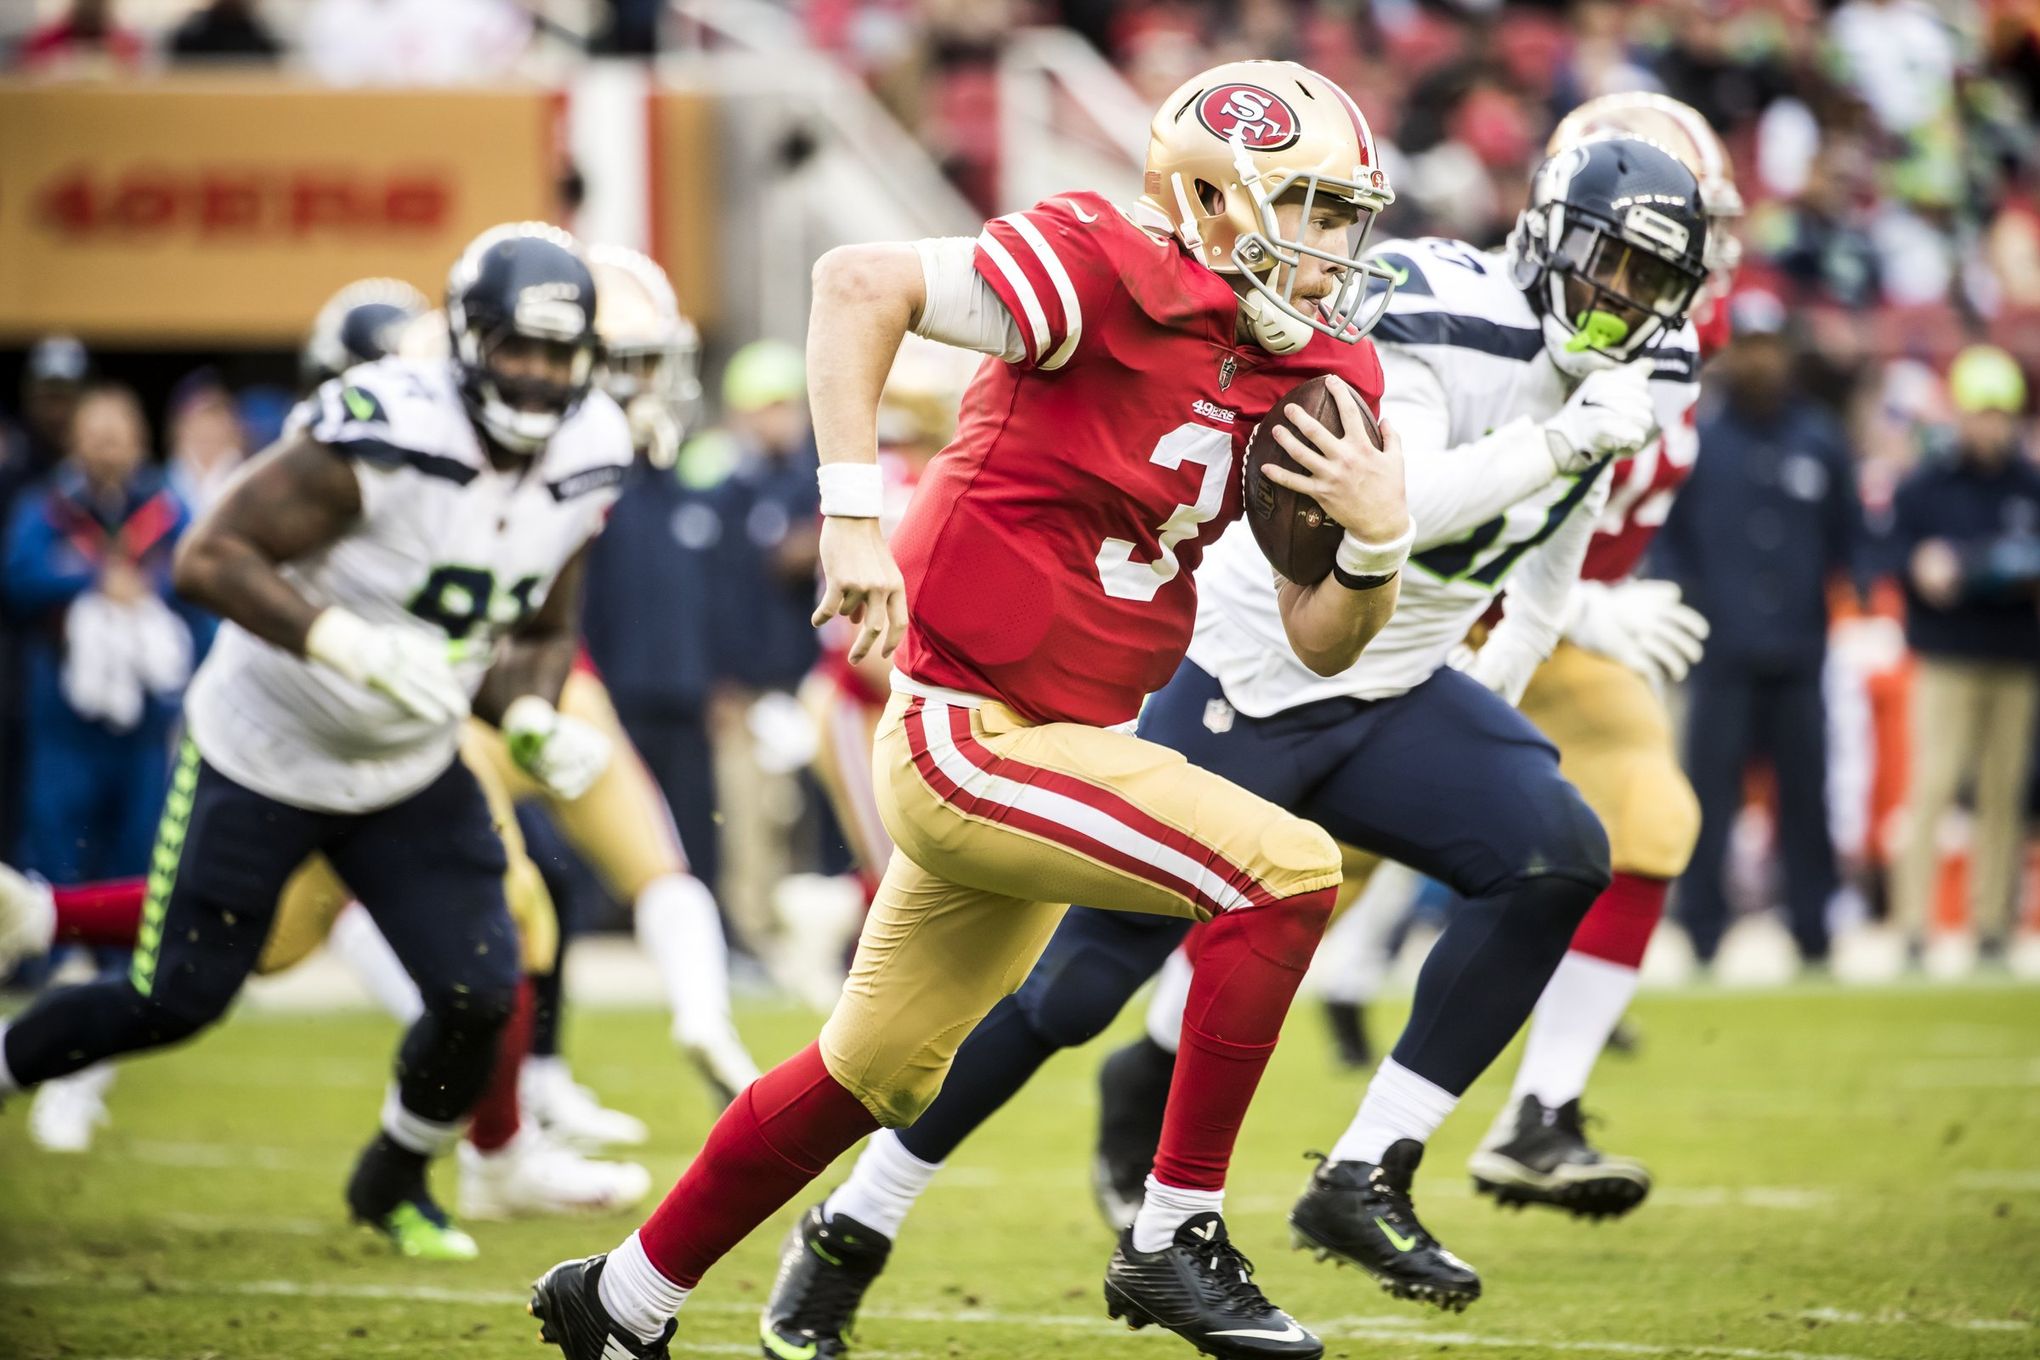 High-tech paperless tickets have some 49ers fans fed up